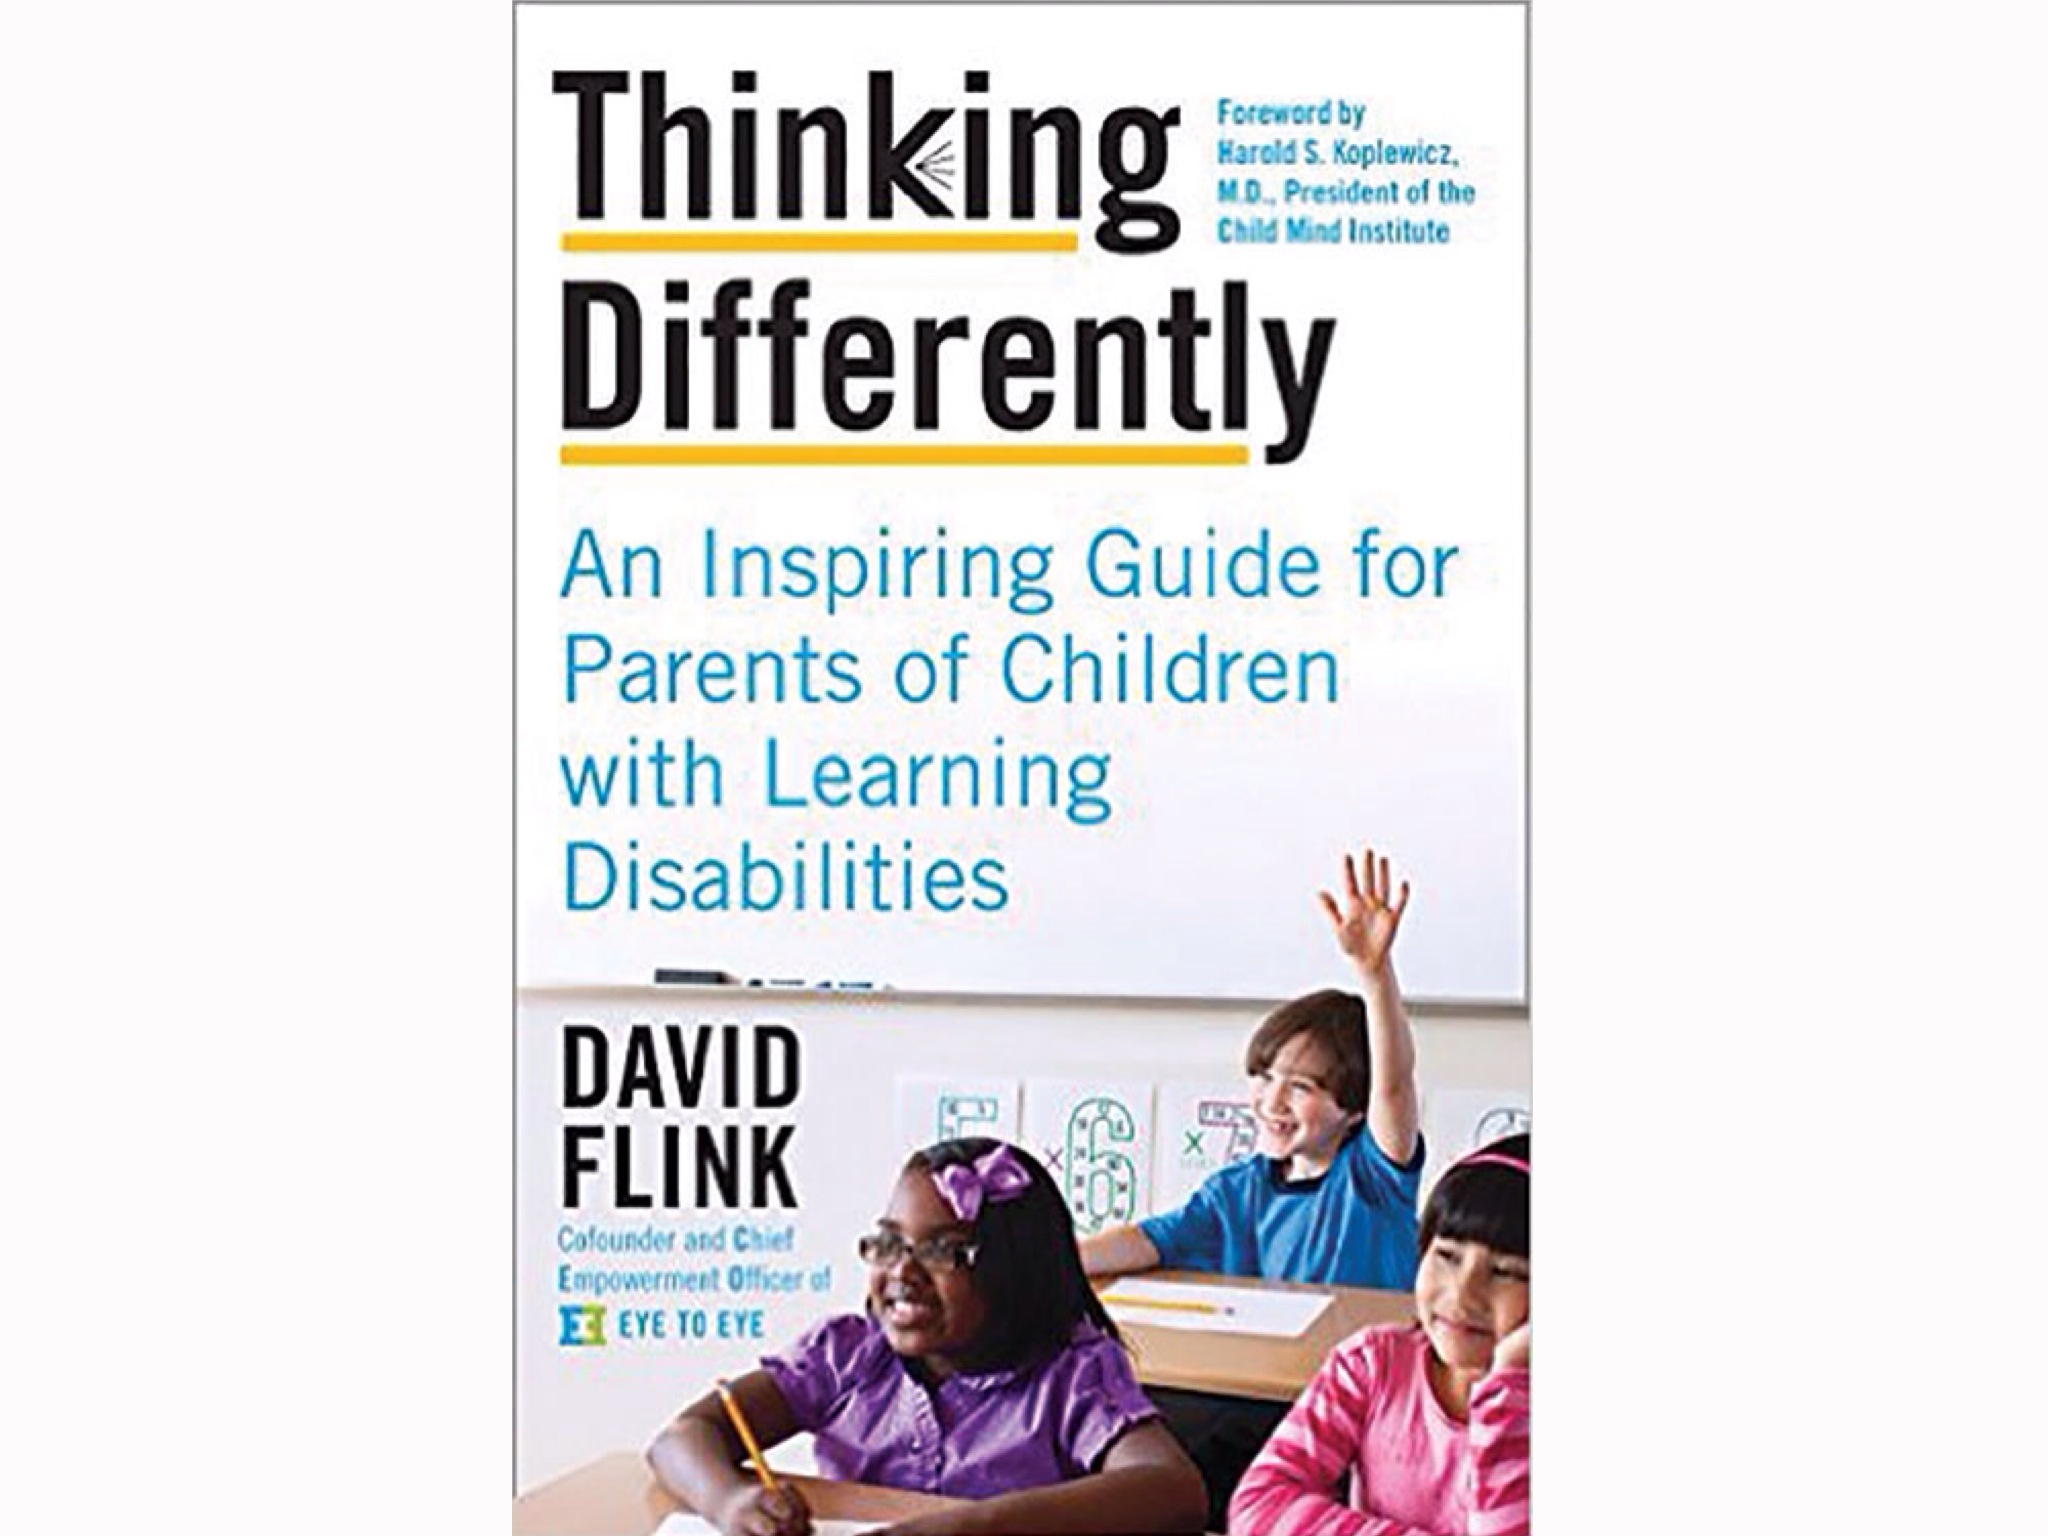 7 New Books About Special Needs And Learning Differences